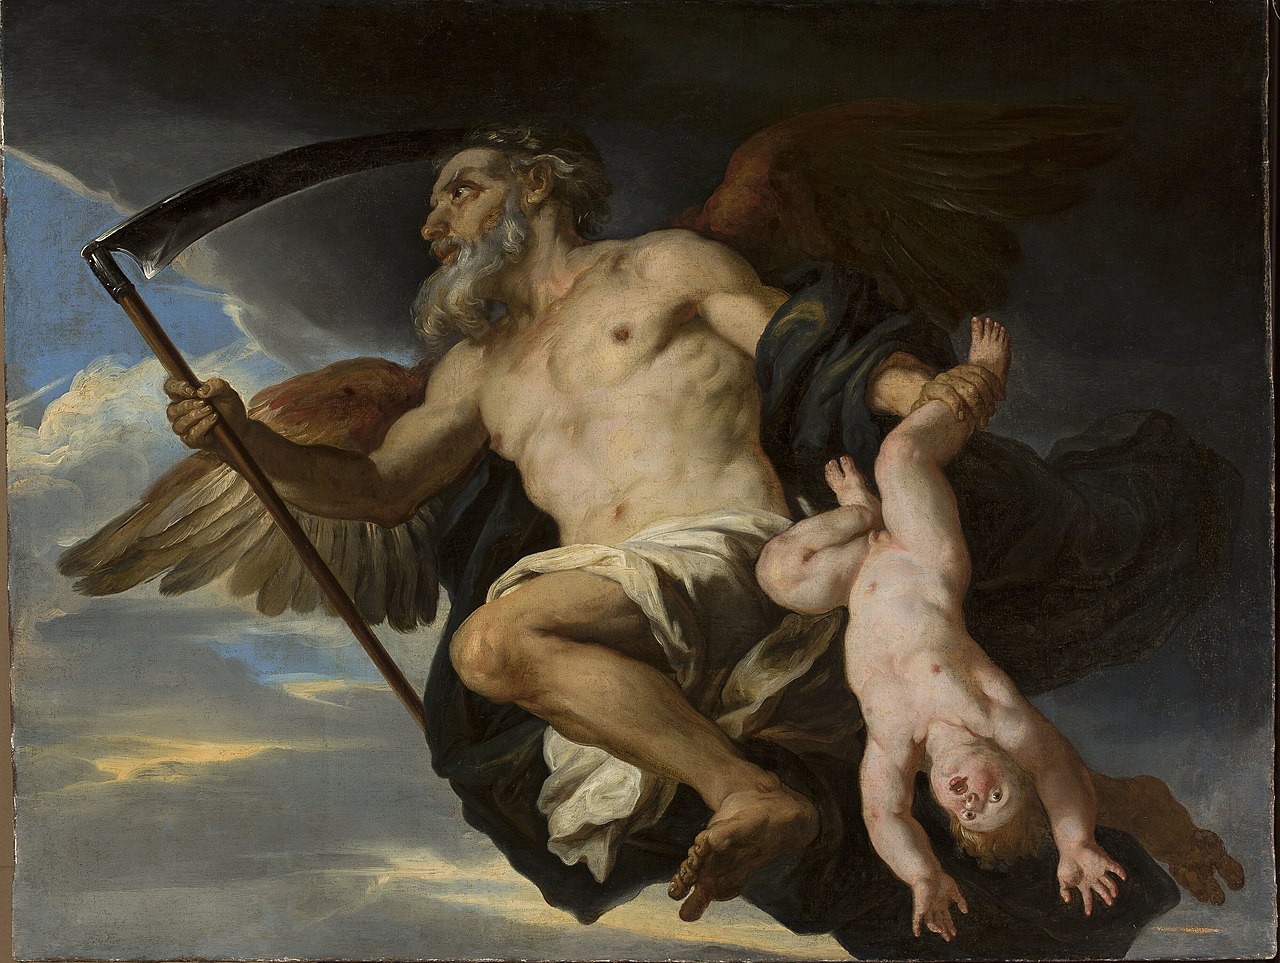 Old man with wings flying in the sky while holding a sickle in one hand, and a baby boy by the ankle in the other hand 